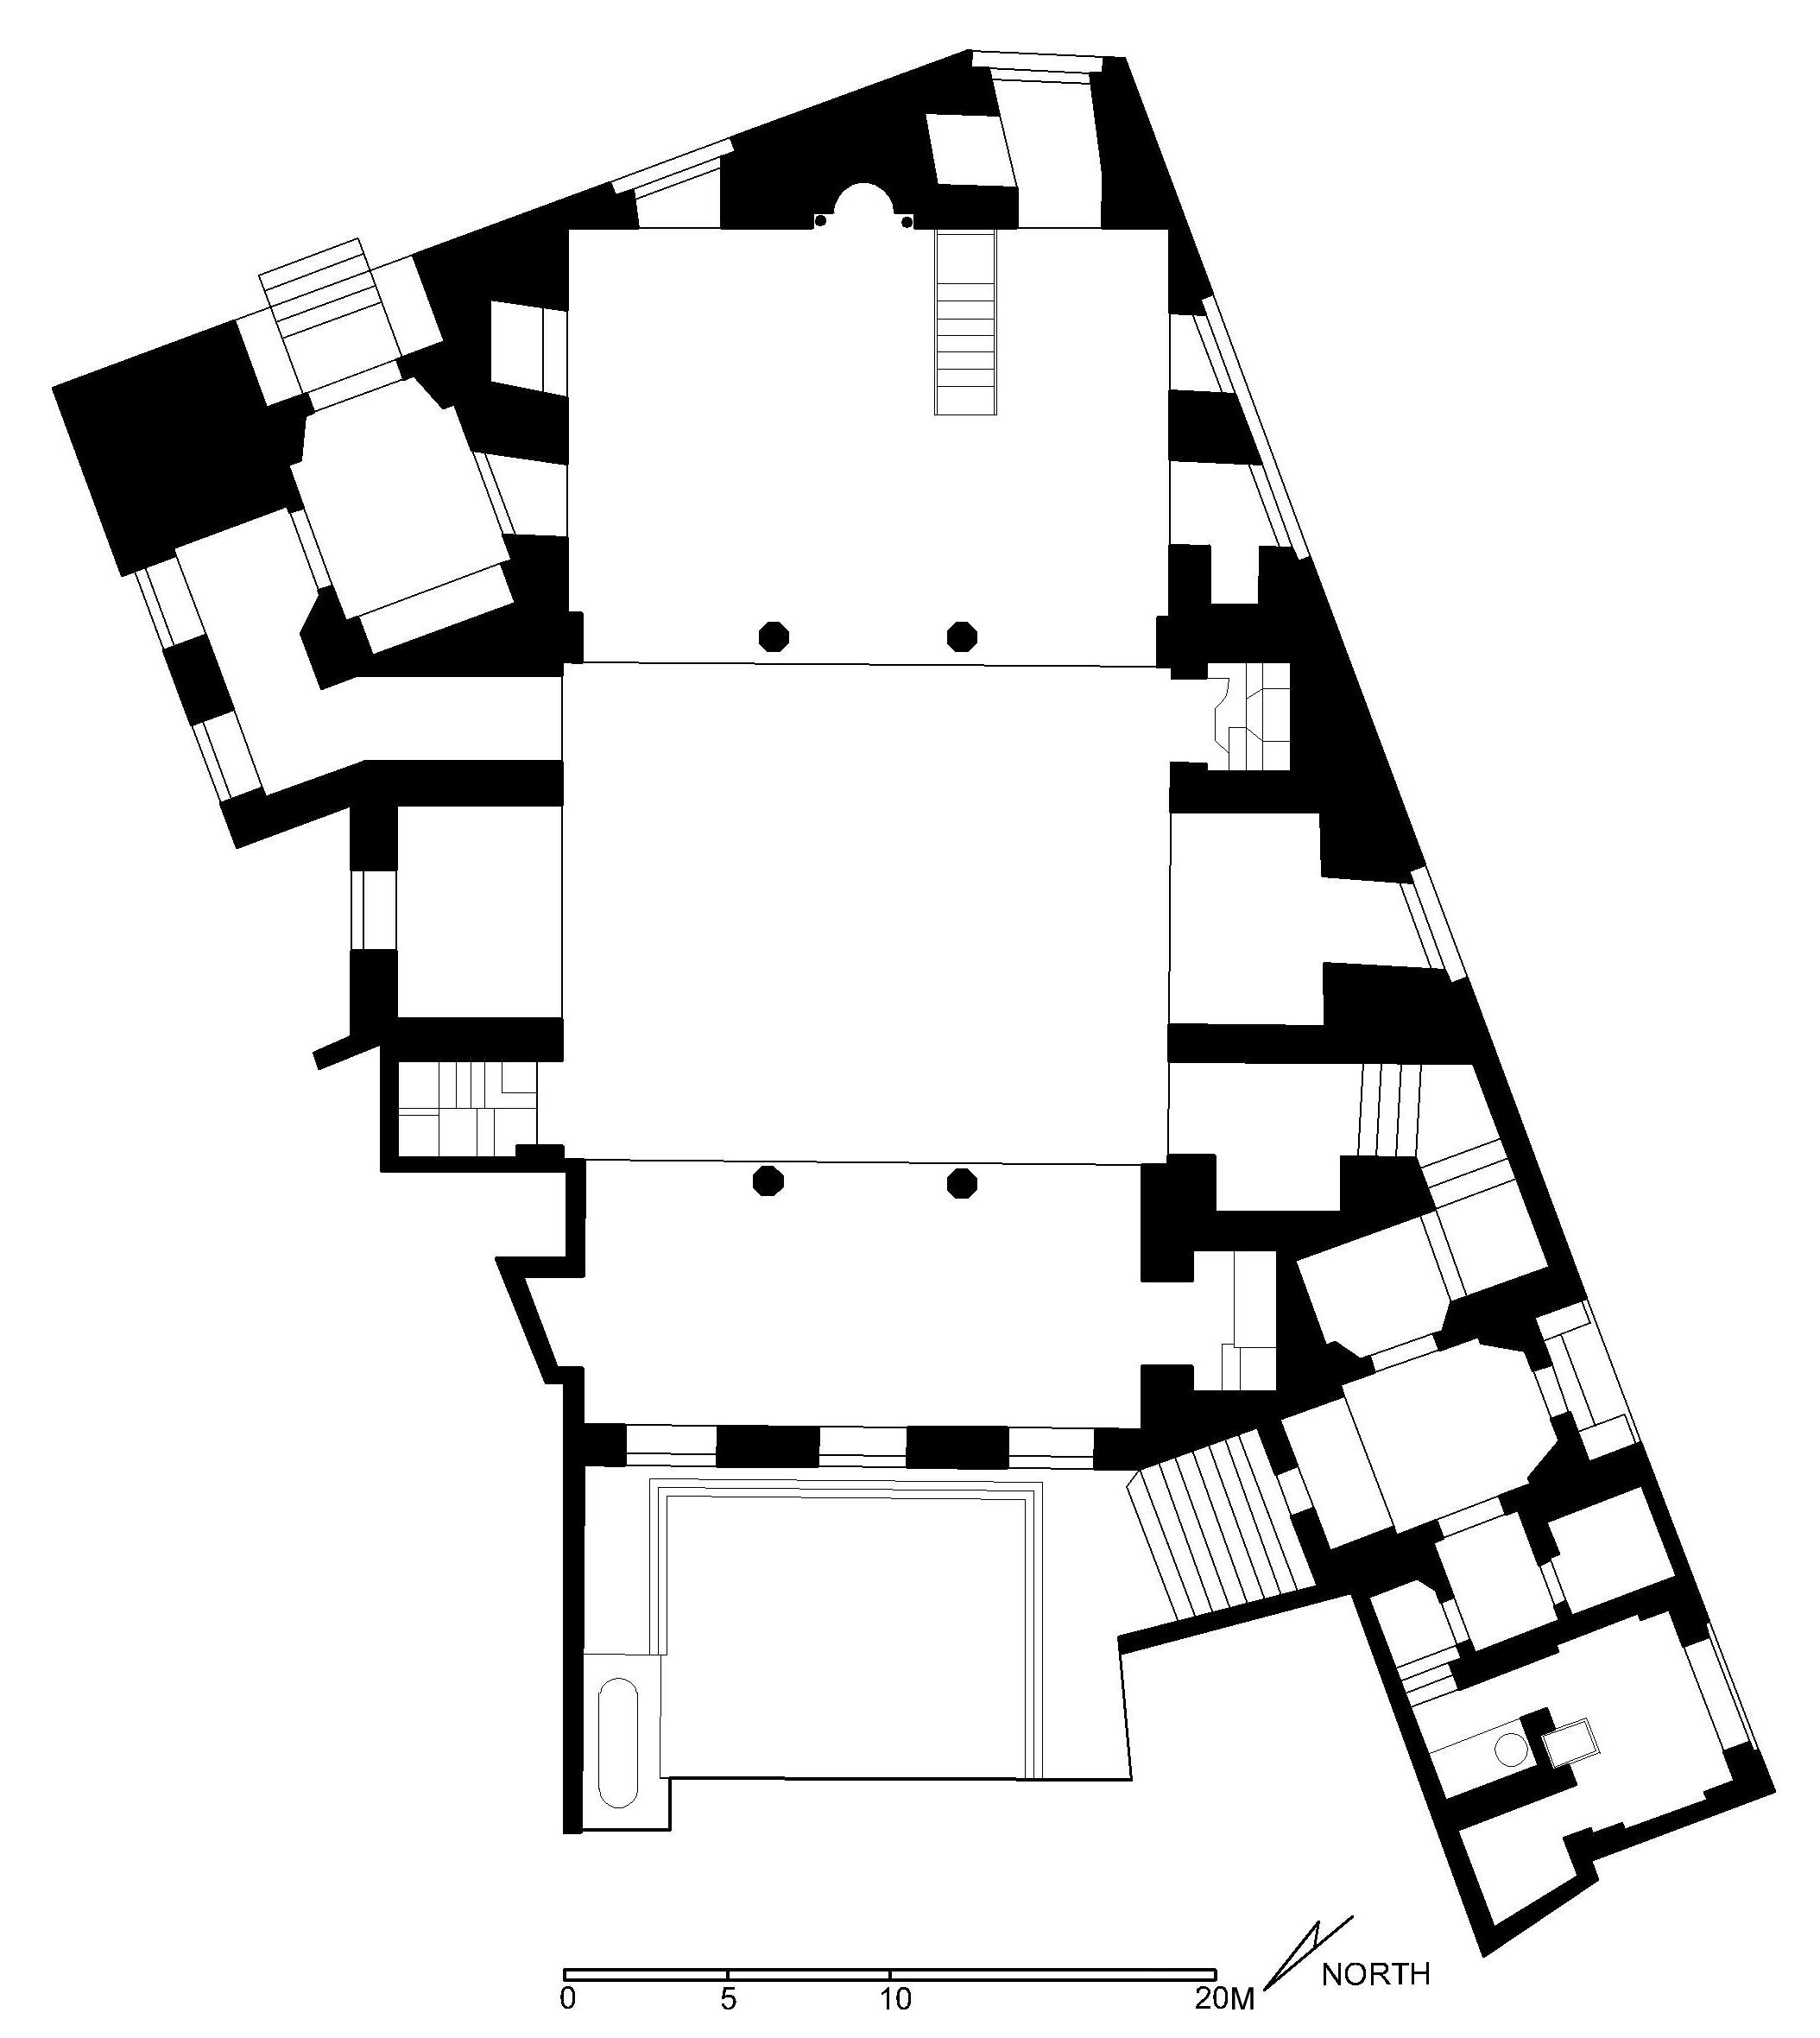 Madrasa Abu Bakr Muzhir - Floor plan of madrasa (after Meinecke) in AutoCAD 2000 format. Click the download button to download a zipped file containing the .dwg file.